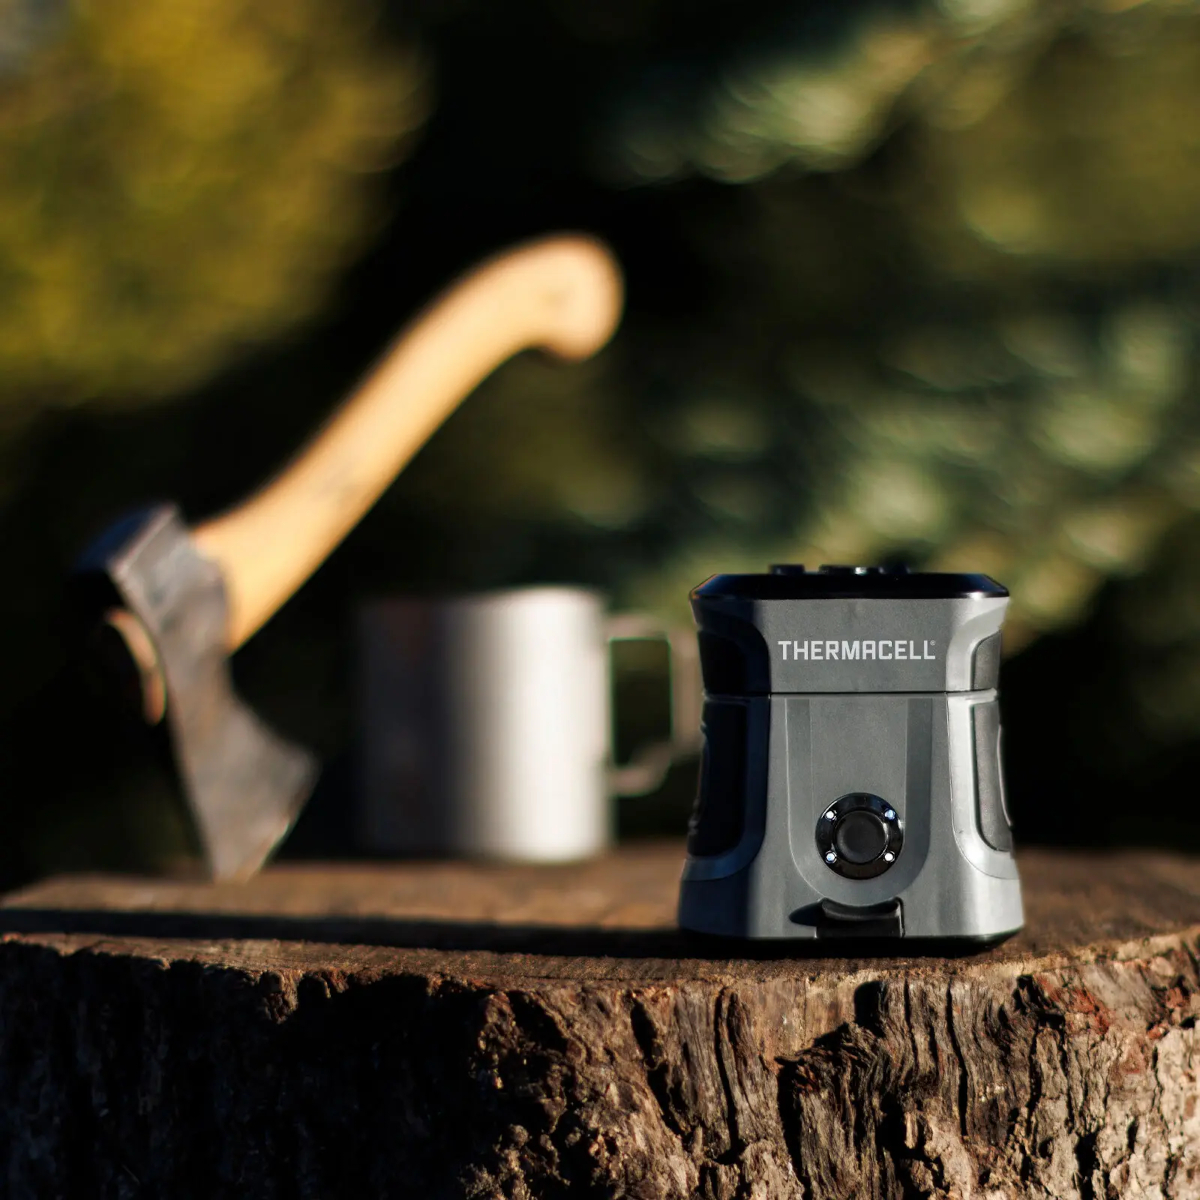 A small Thermacell Mosquito Repellent unit sitting on a tree stump outdoors.